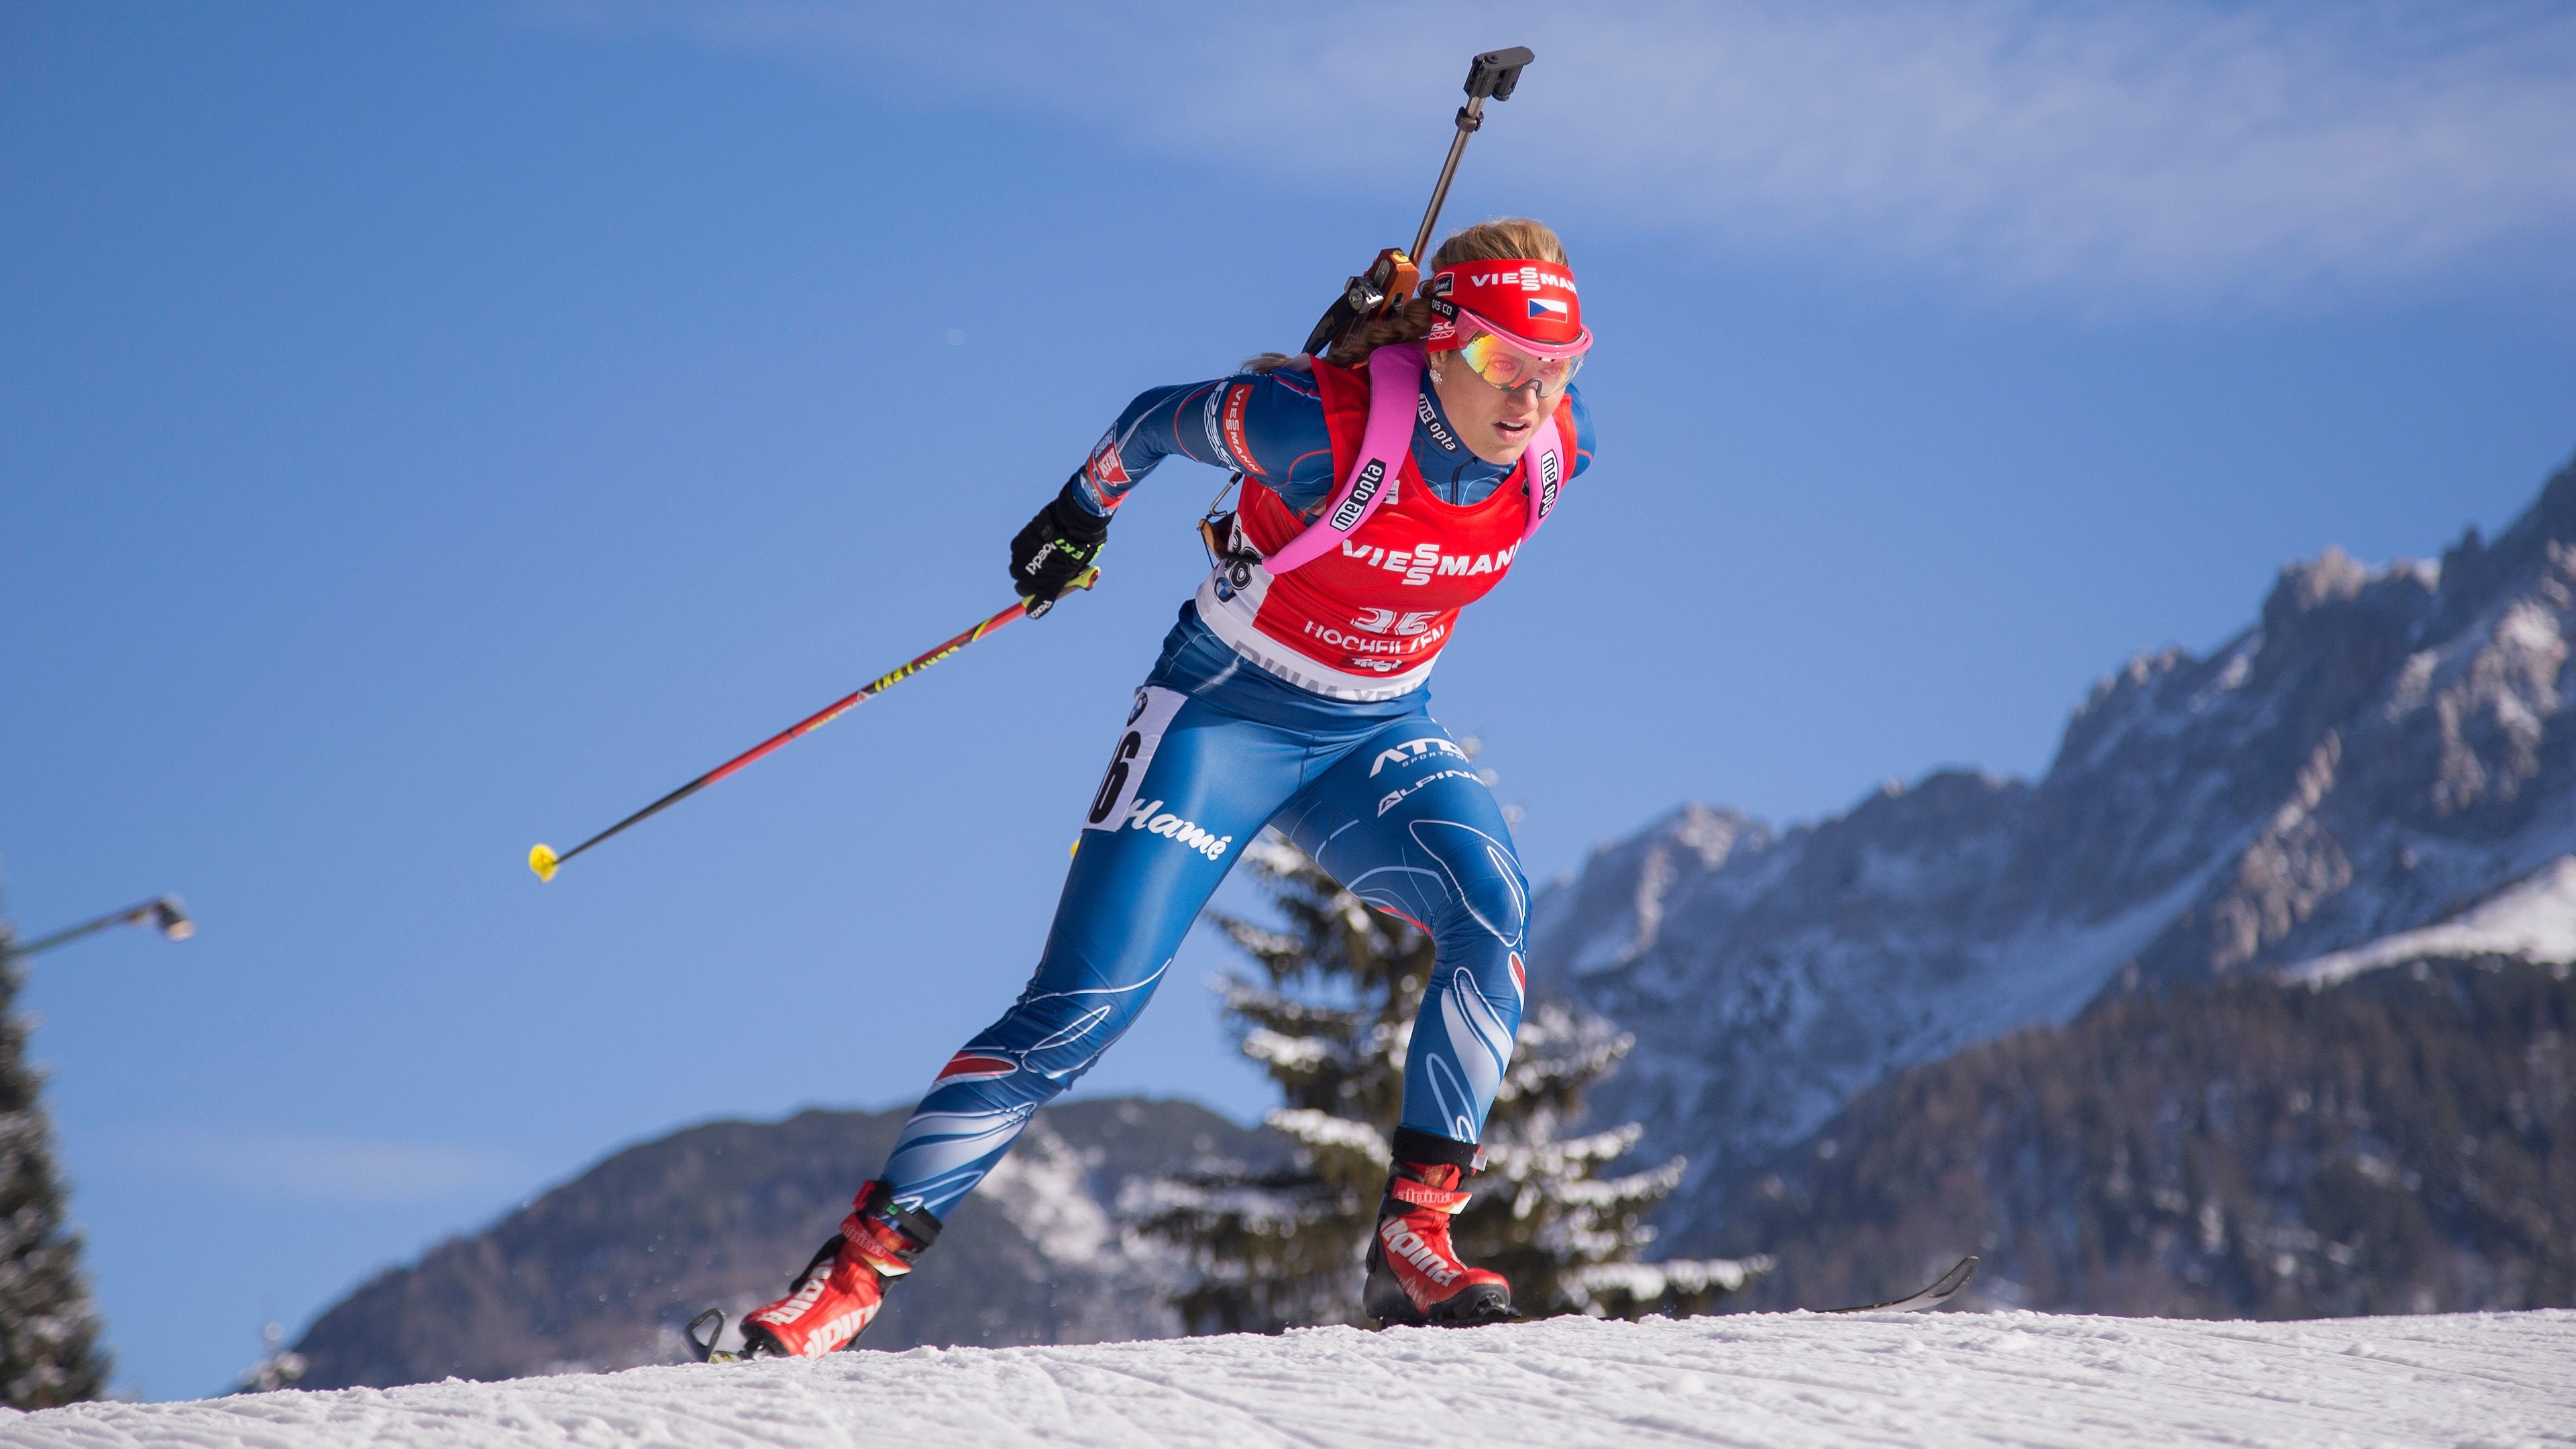 Biathlon: A winter sport, Cross-country skiing, Rifle shooting, The shooting rounds. 3840x2160 4K Background.